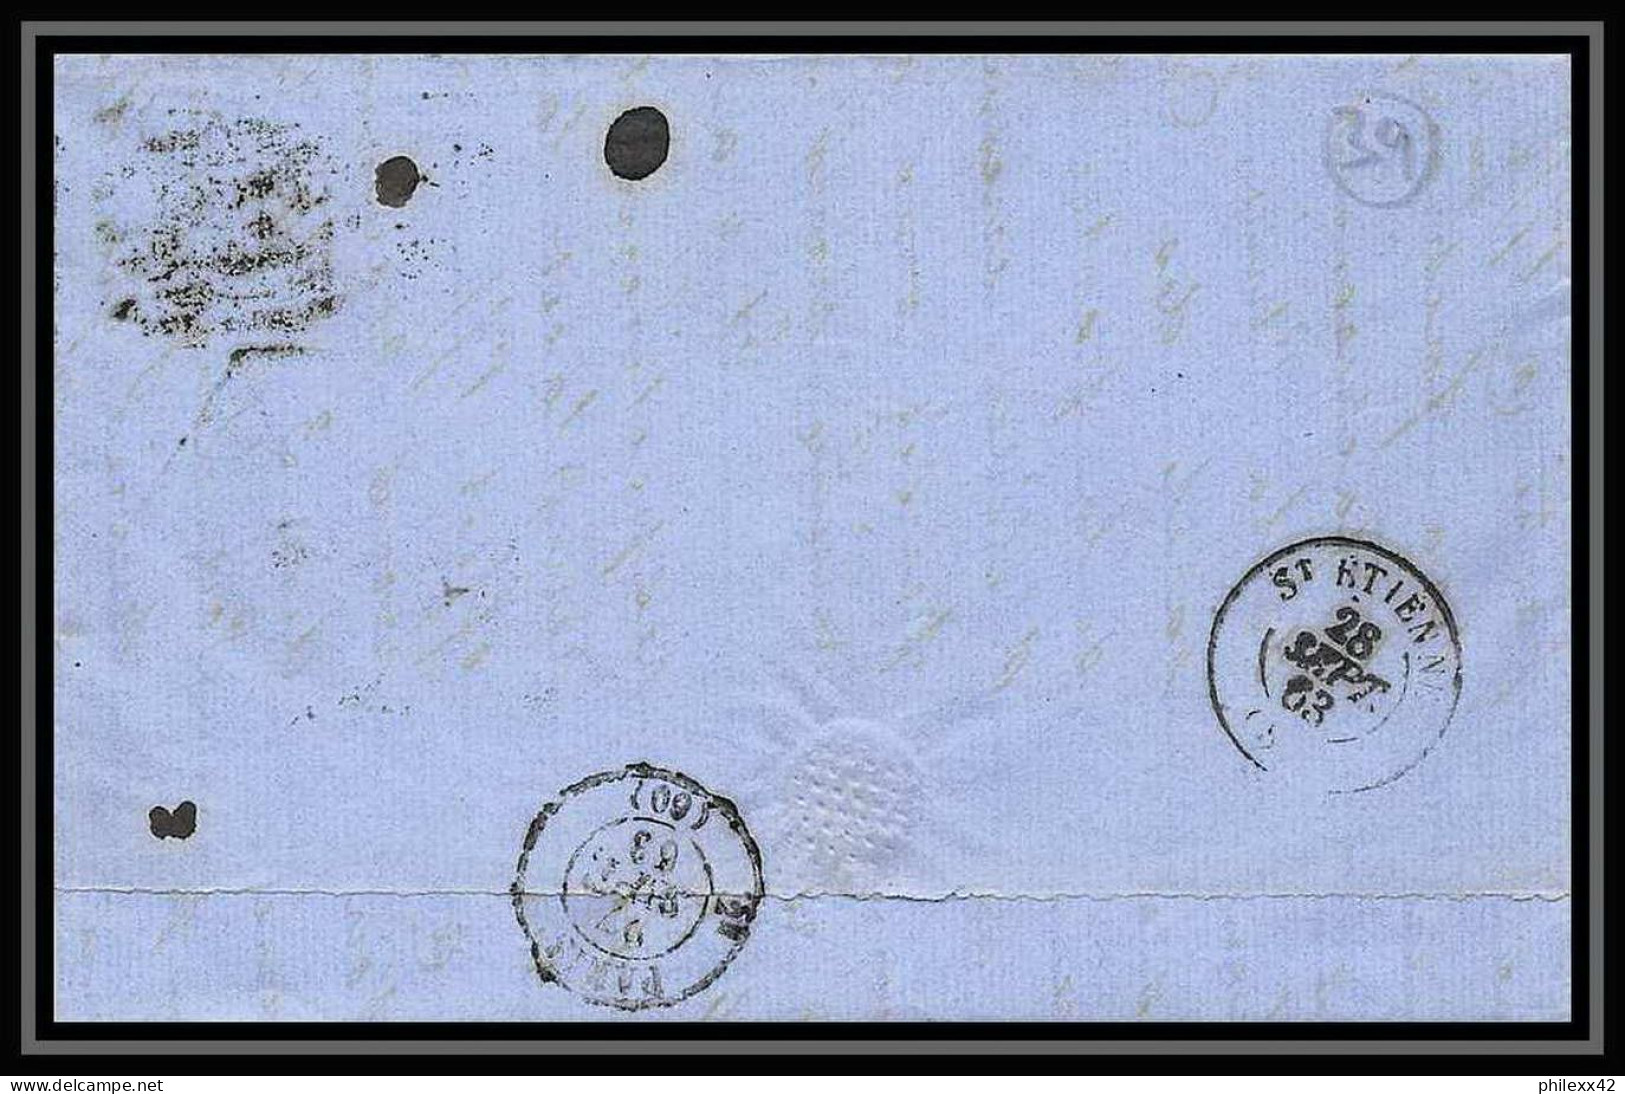 35710 N°32 Victoria 4p Red London St Etienne France 1863 Cachet 73 Lettre Cover Grande Bretagne England - Covers & Documents